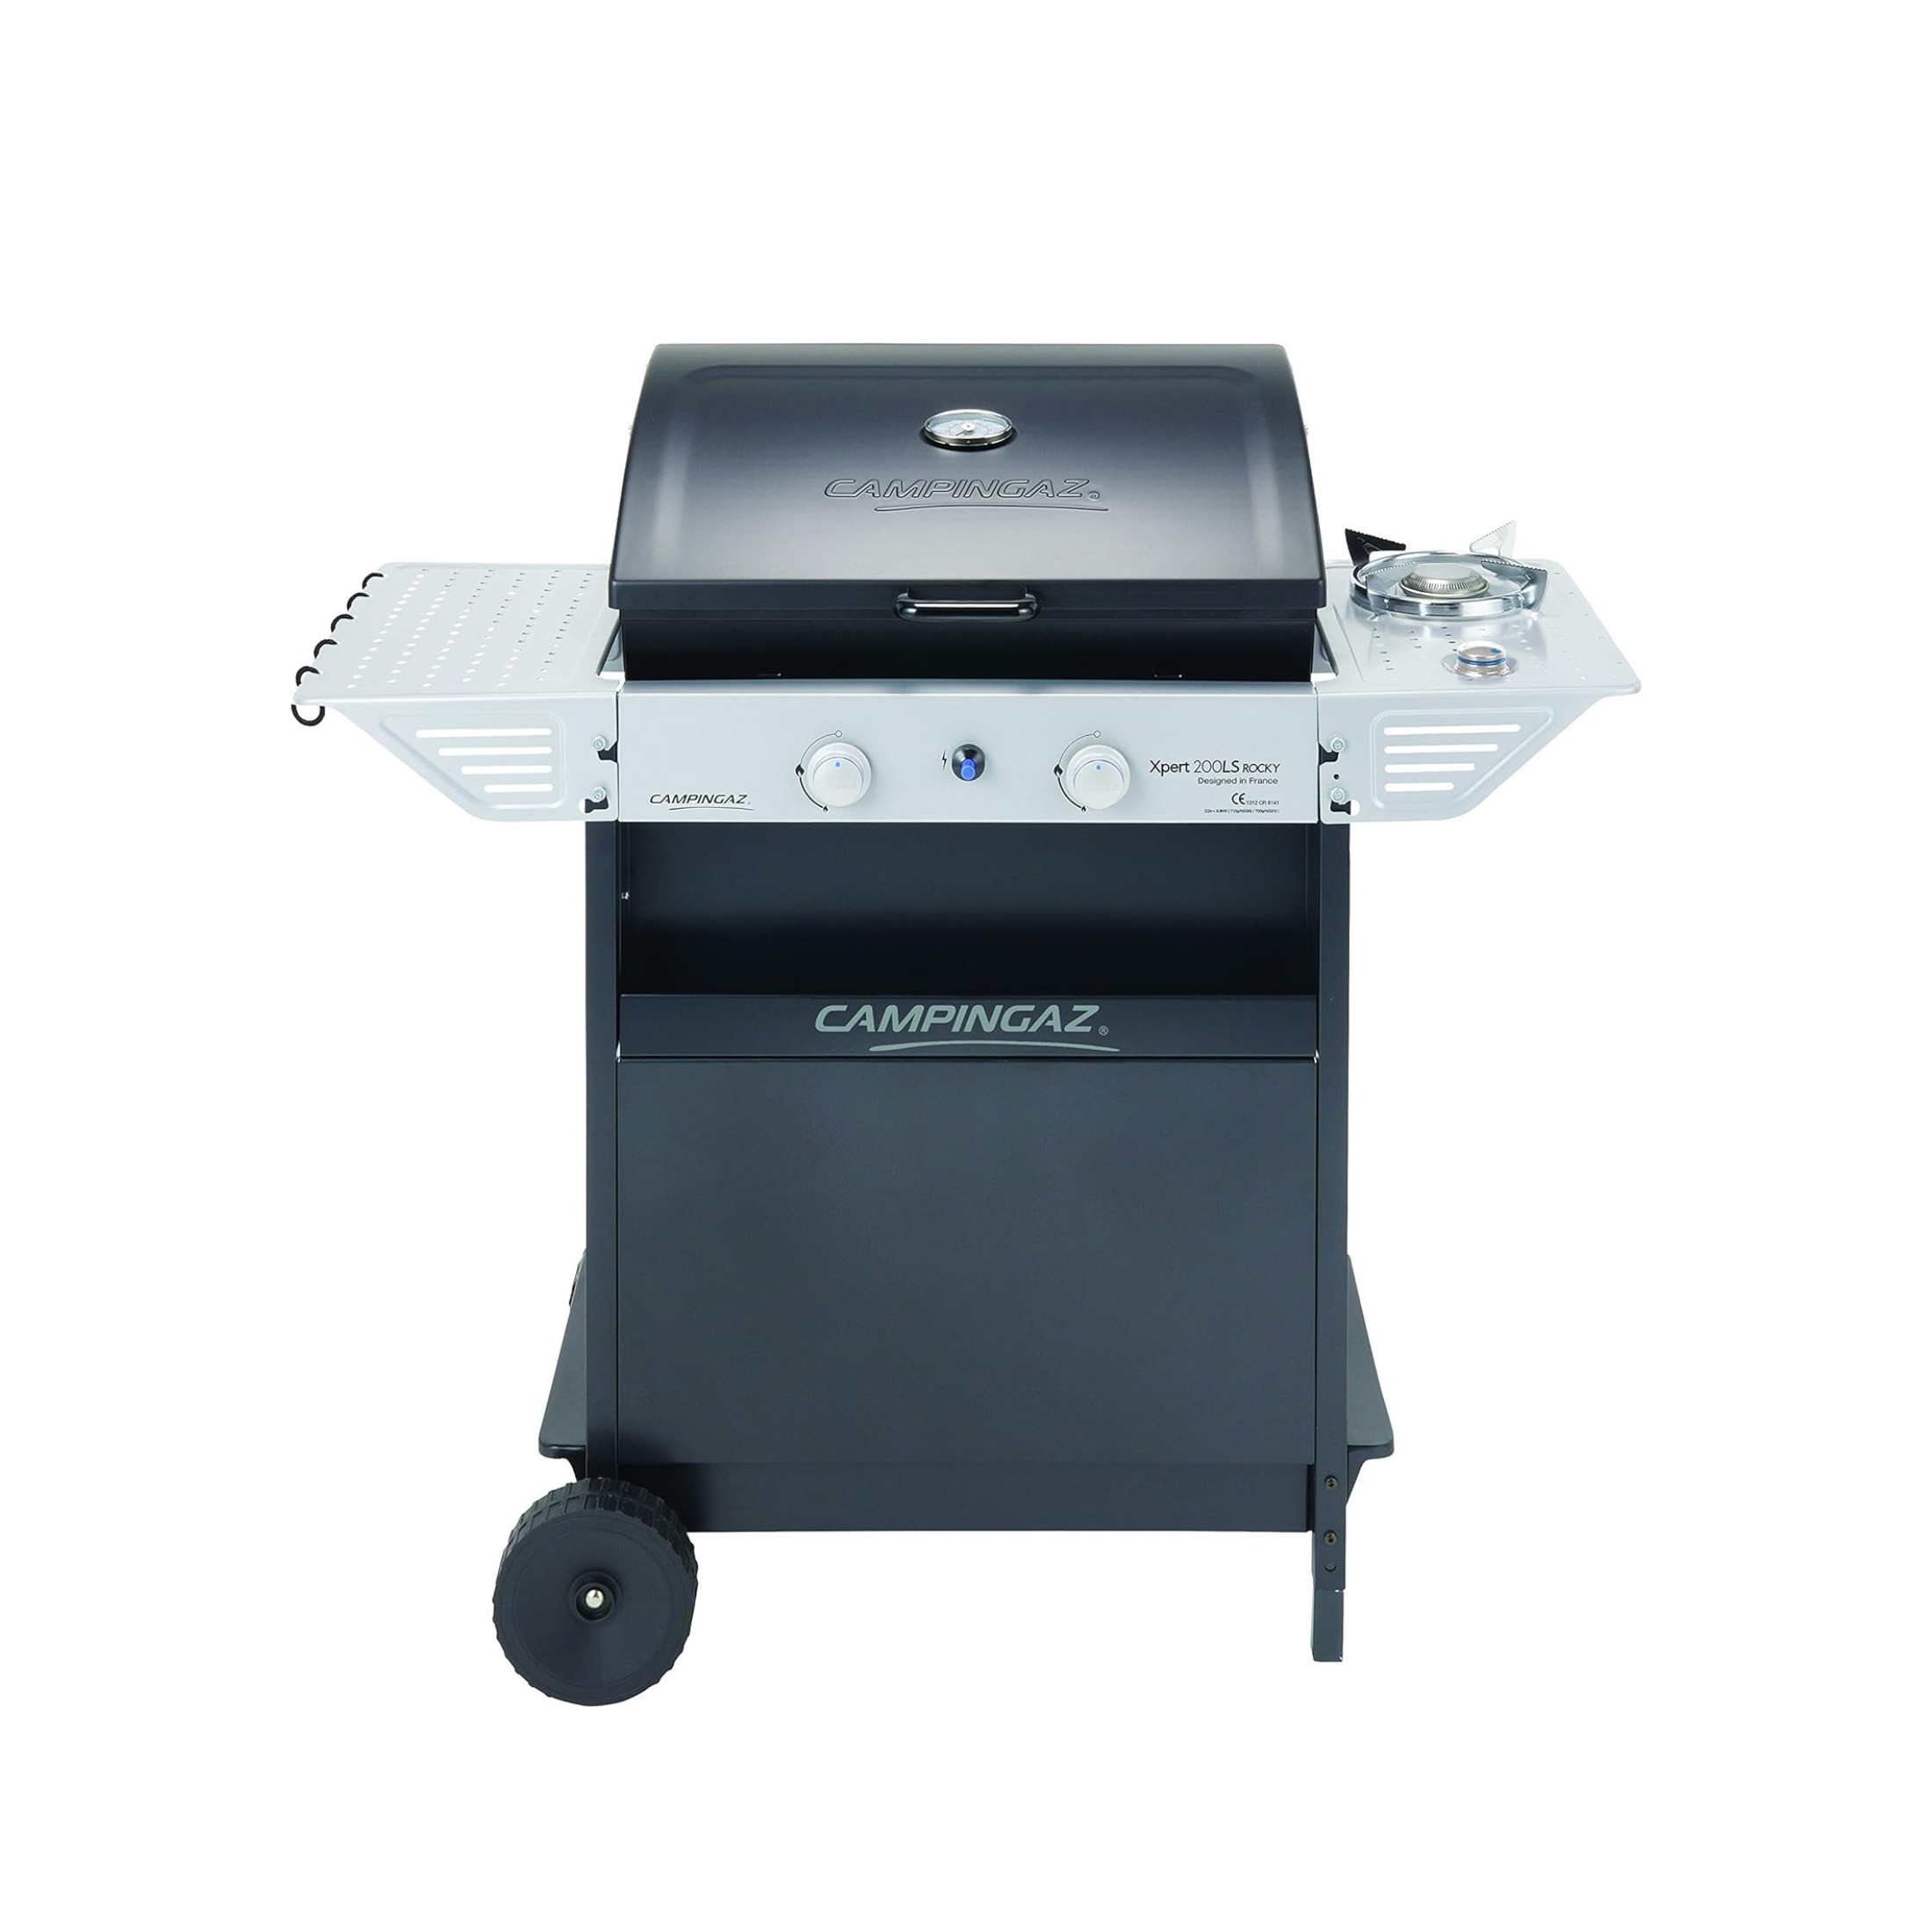 Barbecue a gas in acciaio inox "Xpert 200LS Plus+Rocky" 2 griglie in ghisa e ruote